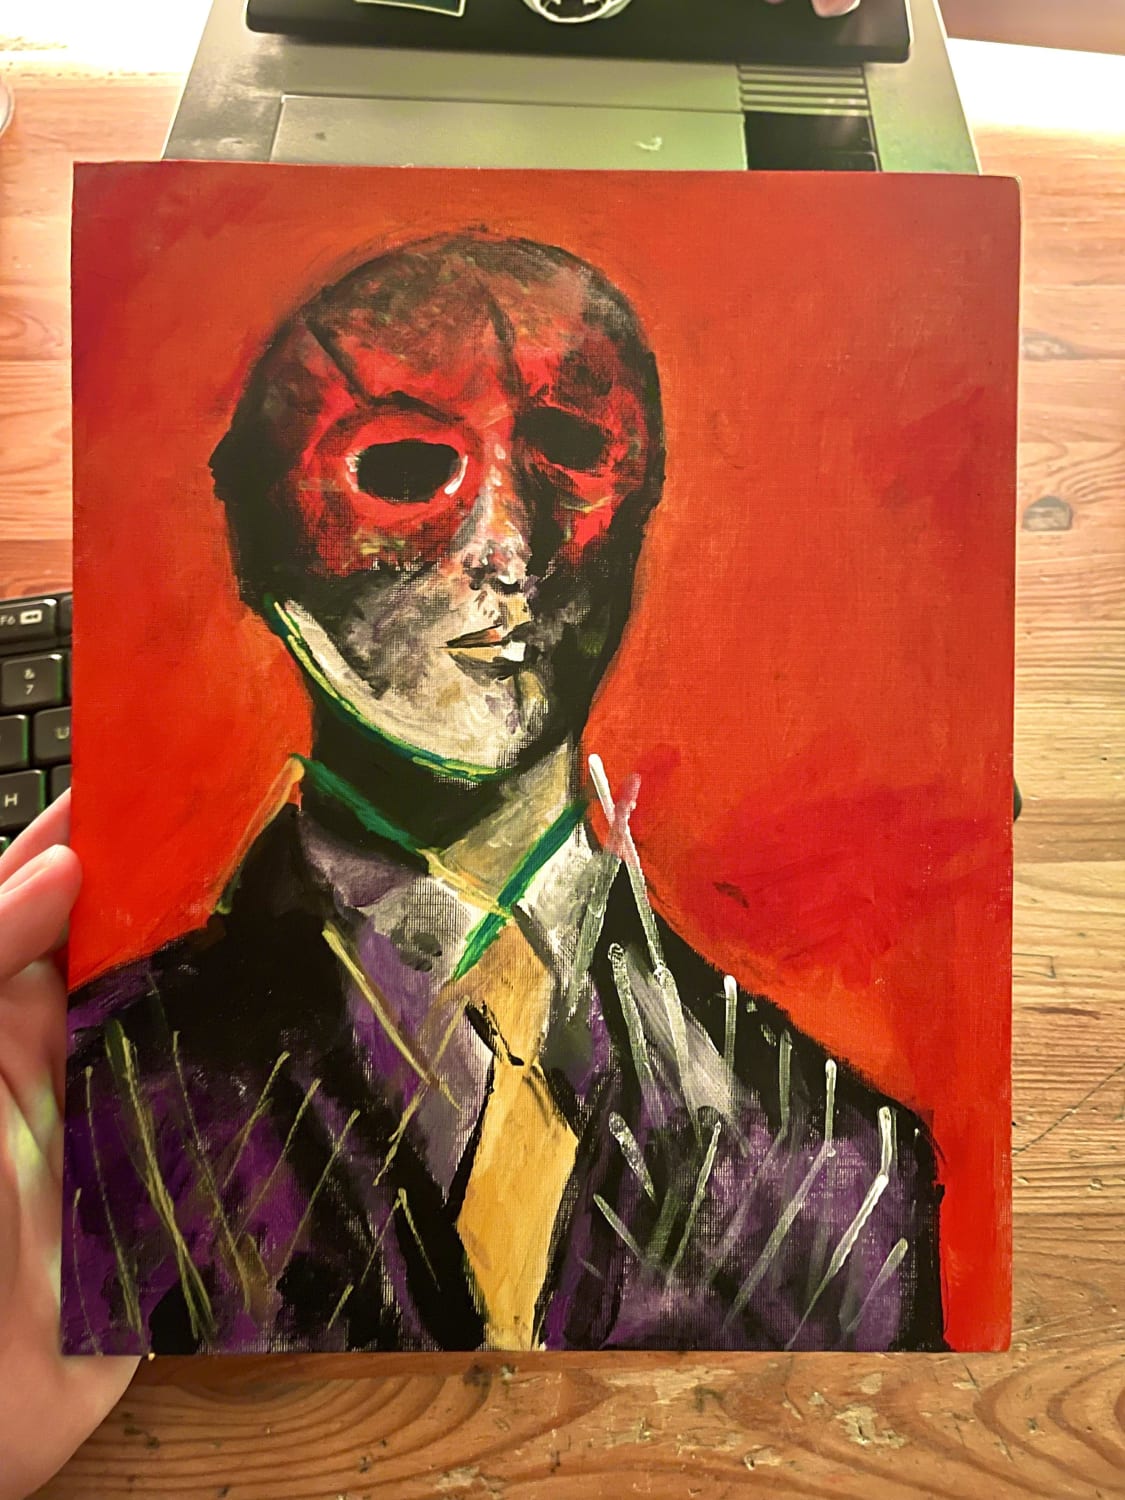 First time painting, I tried to paint the American Psycho book cover